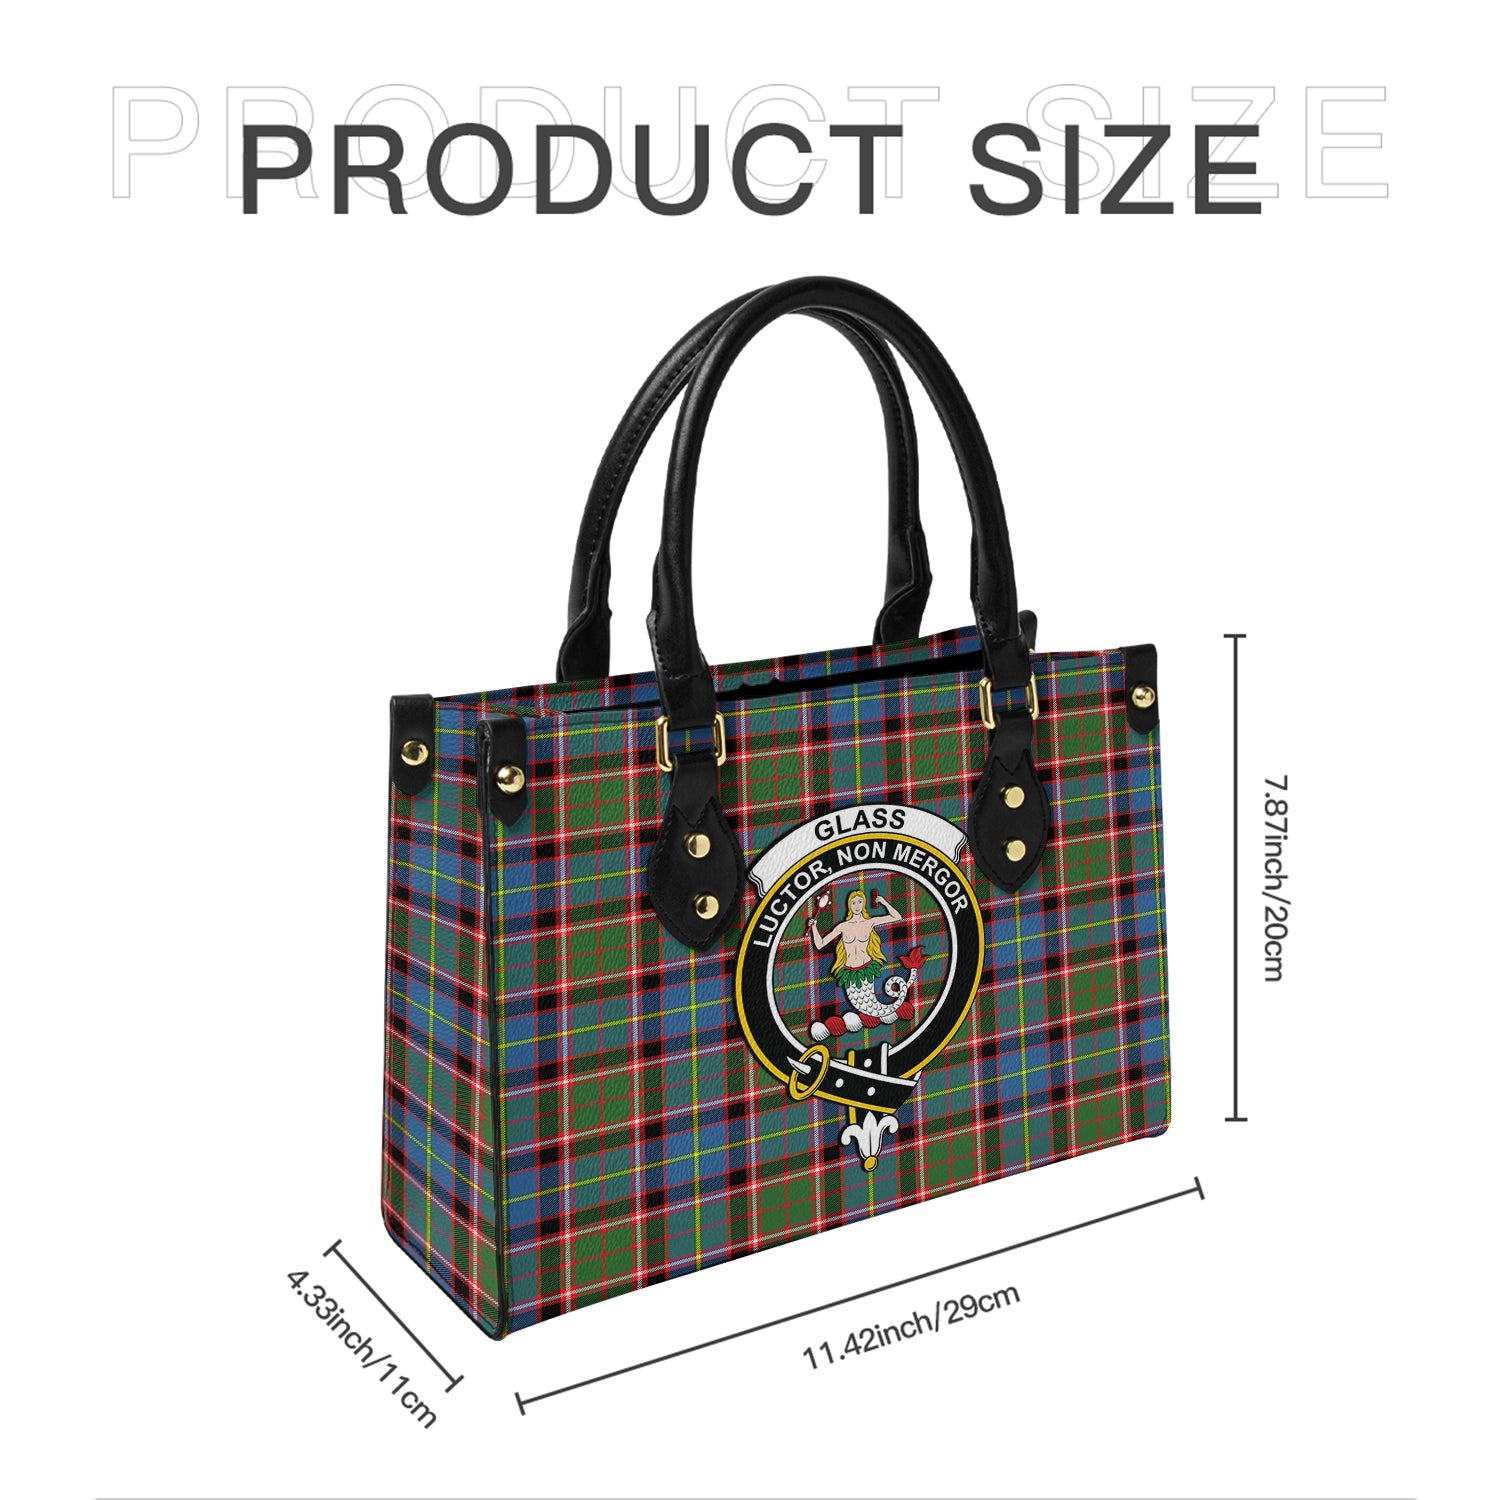 glass-tartan-leather-bag-with-family-crest